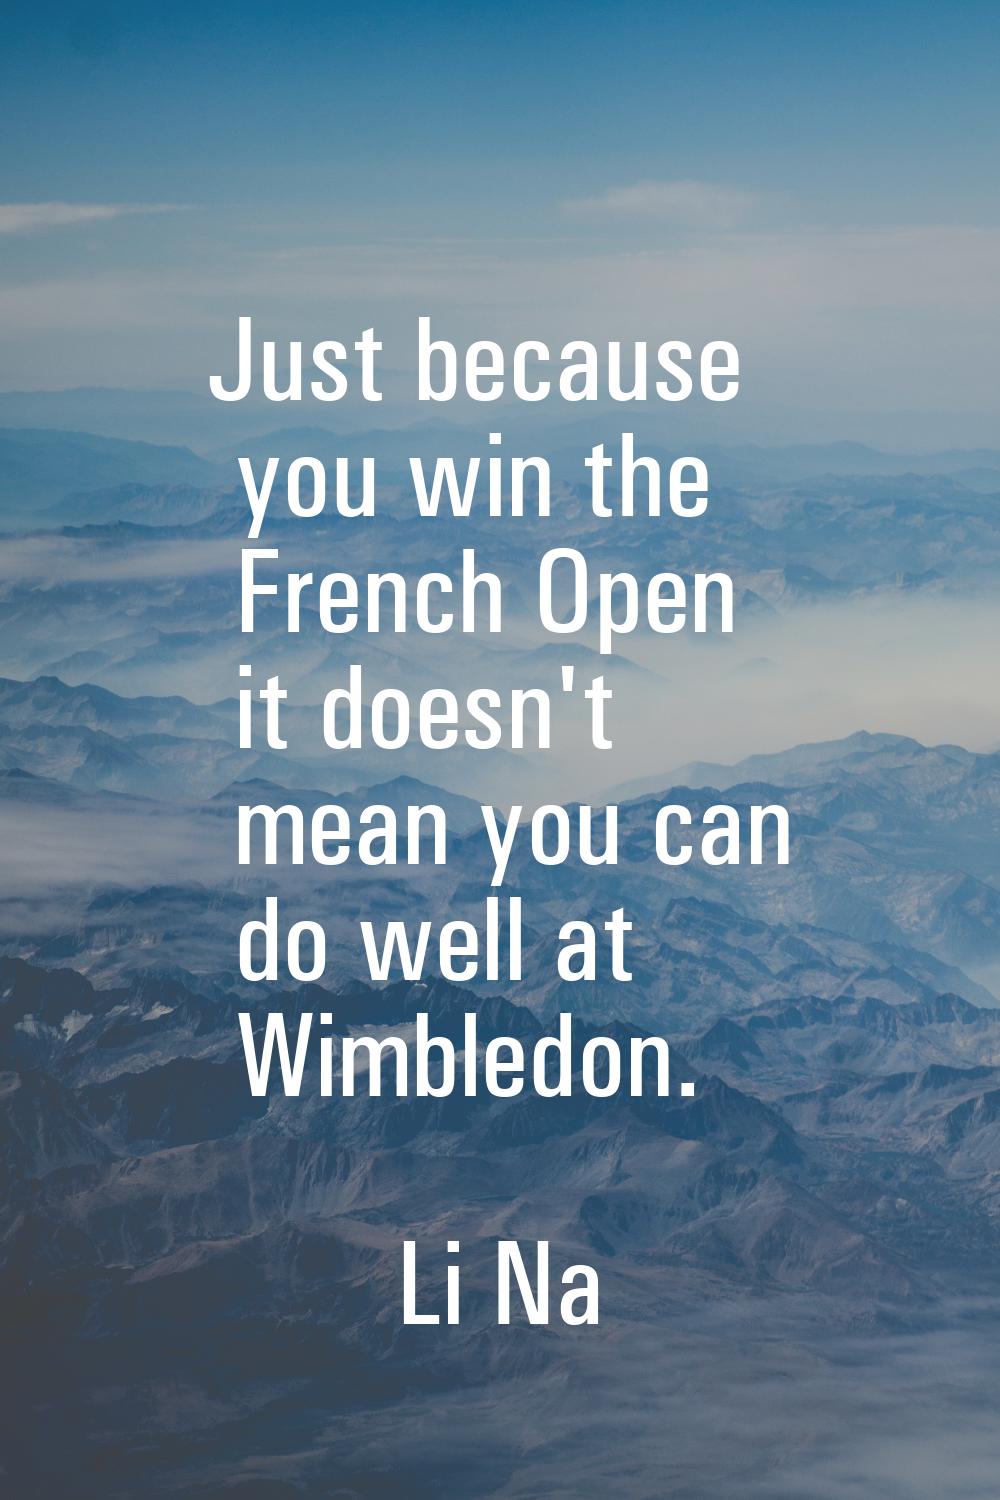 Just because you win the French Open it doesn't mean you can do well at Wimbledon.